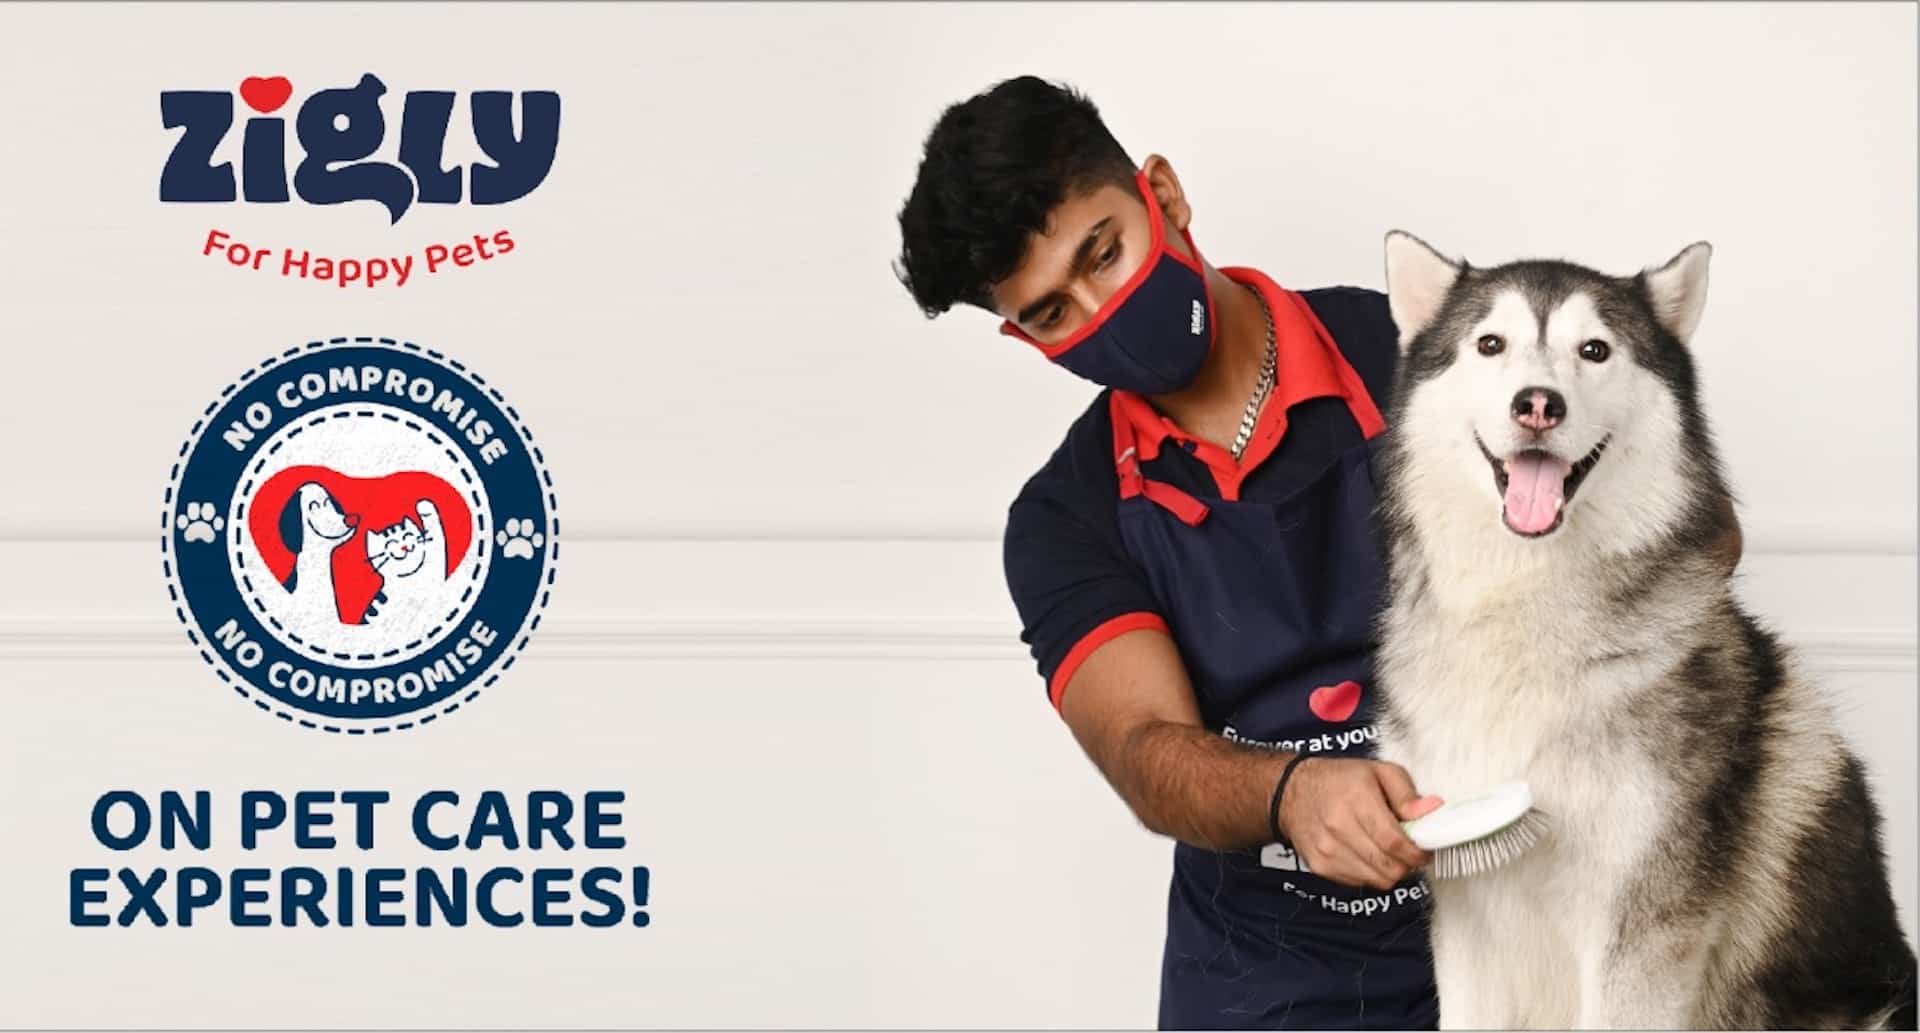 Zigly’s brand campaign encourages #NoCompromise on pet car